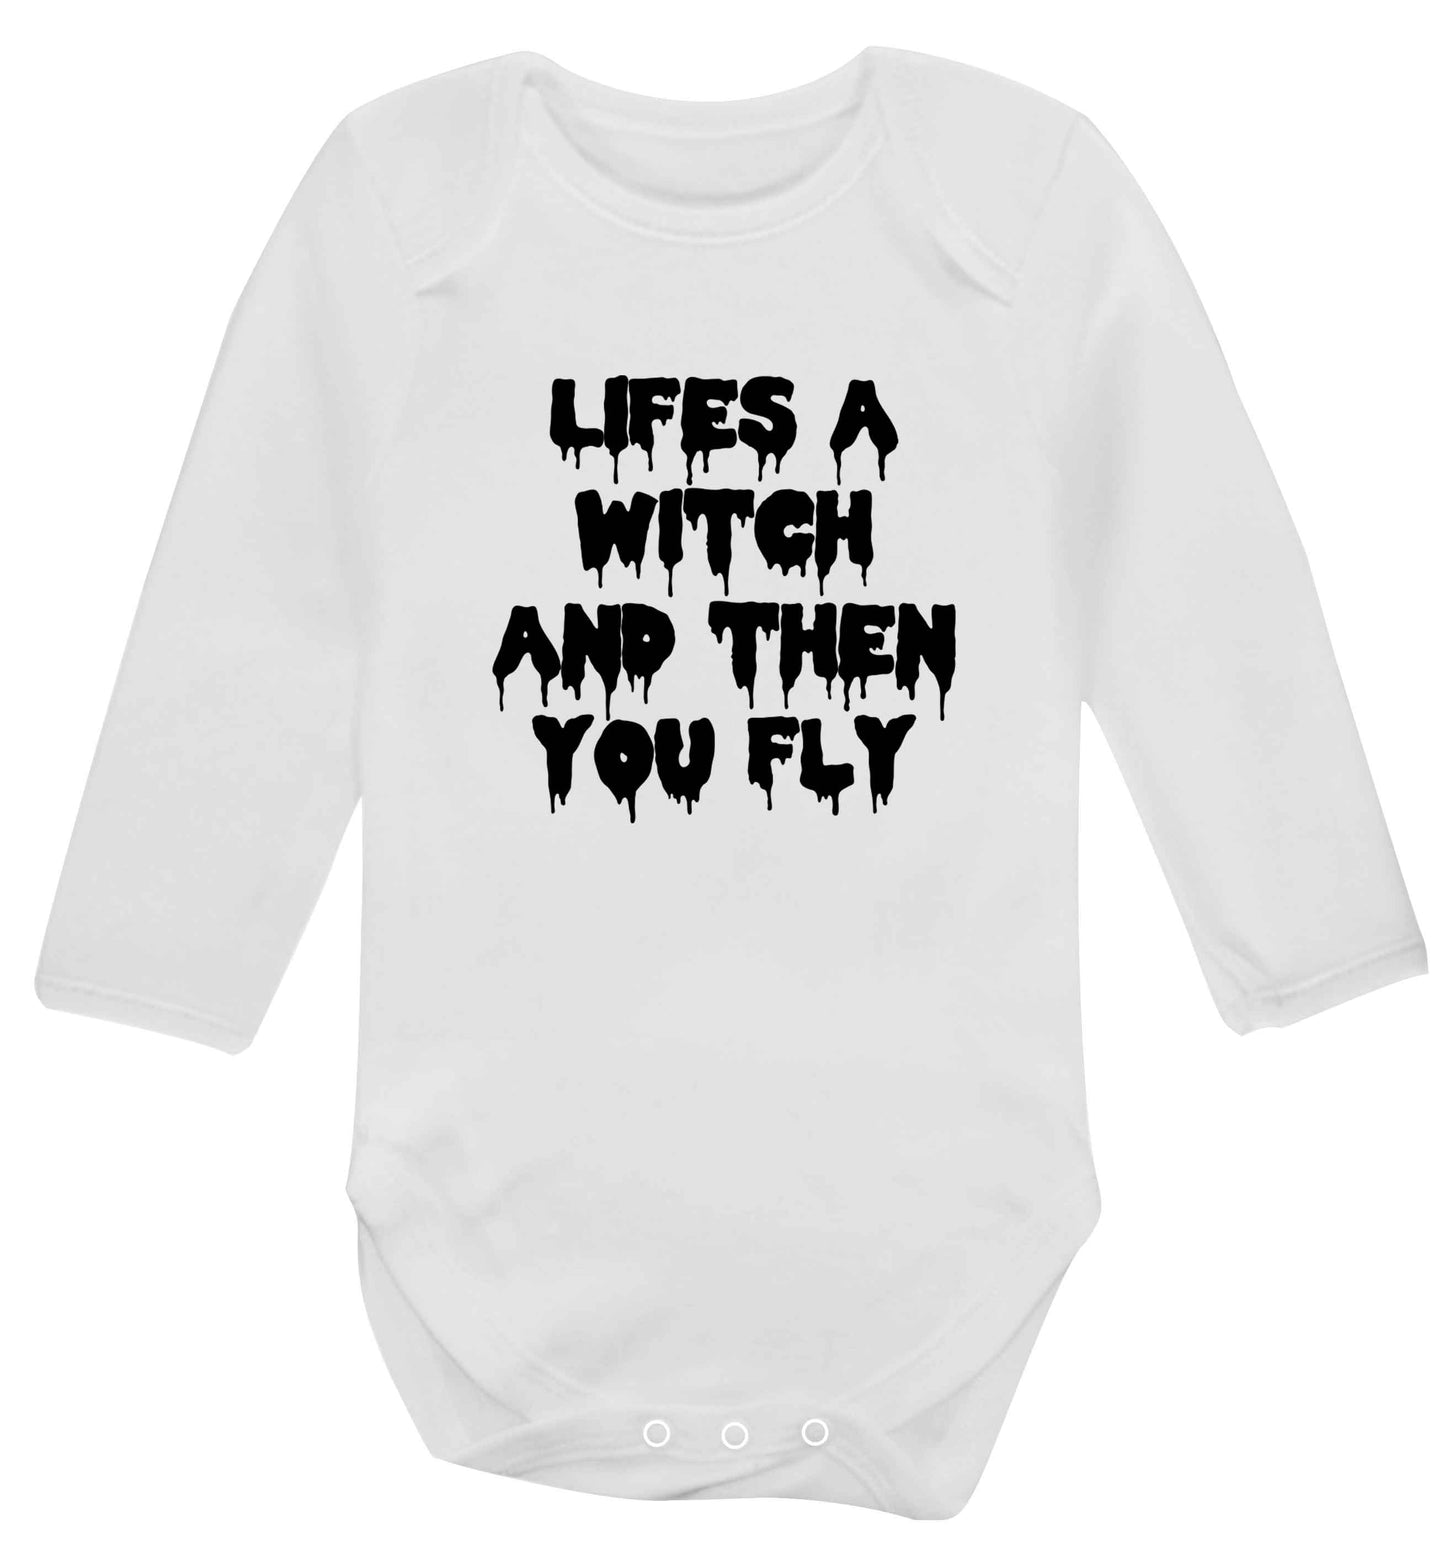 Life's a witch and then you fly baby vest long sleeved white 6-12 months